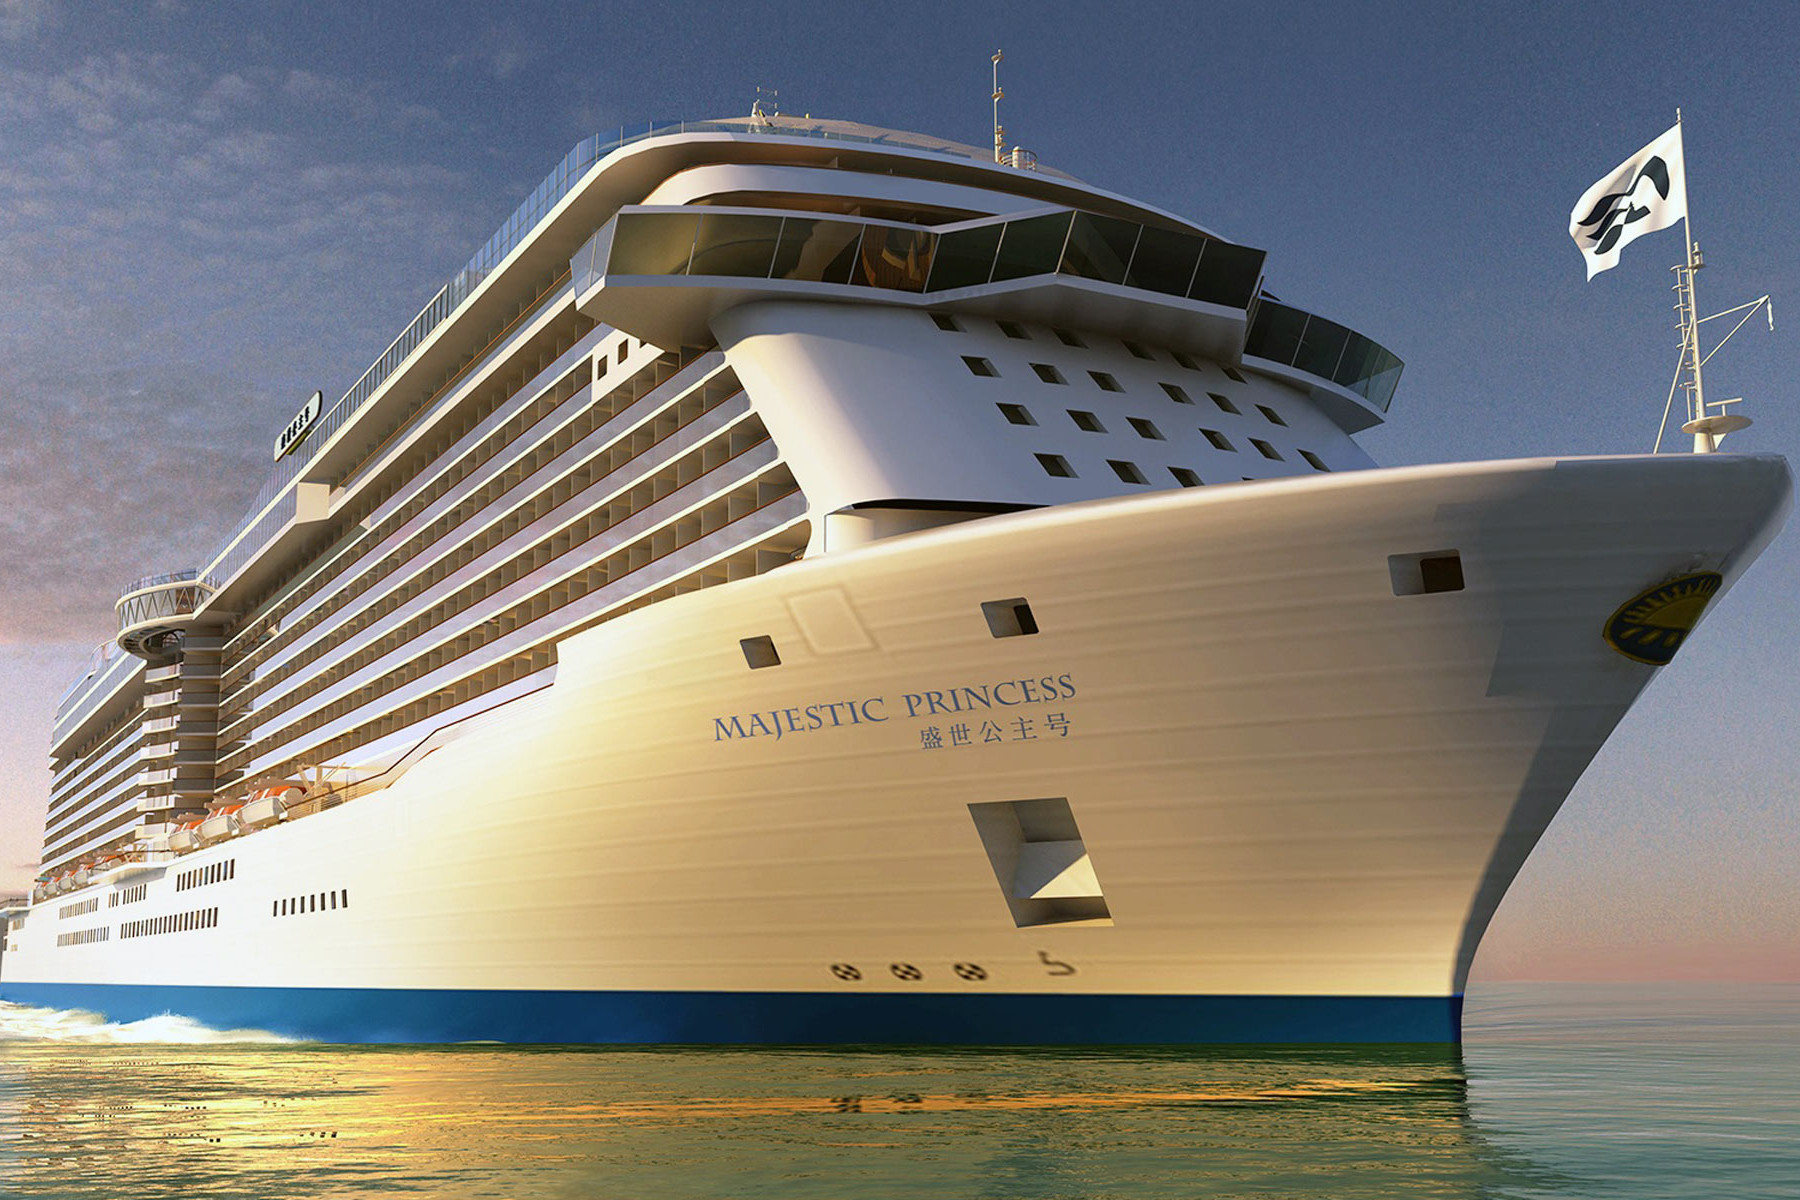 Exciting New Zealand Cruise Majestic Princess Cruise Review